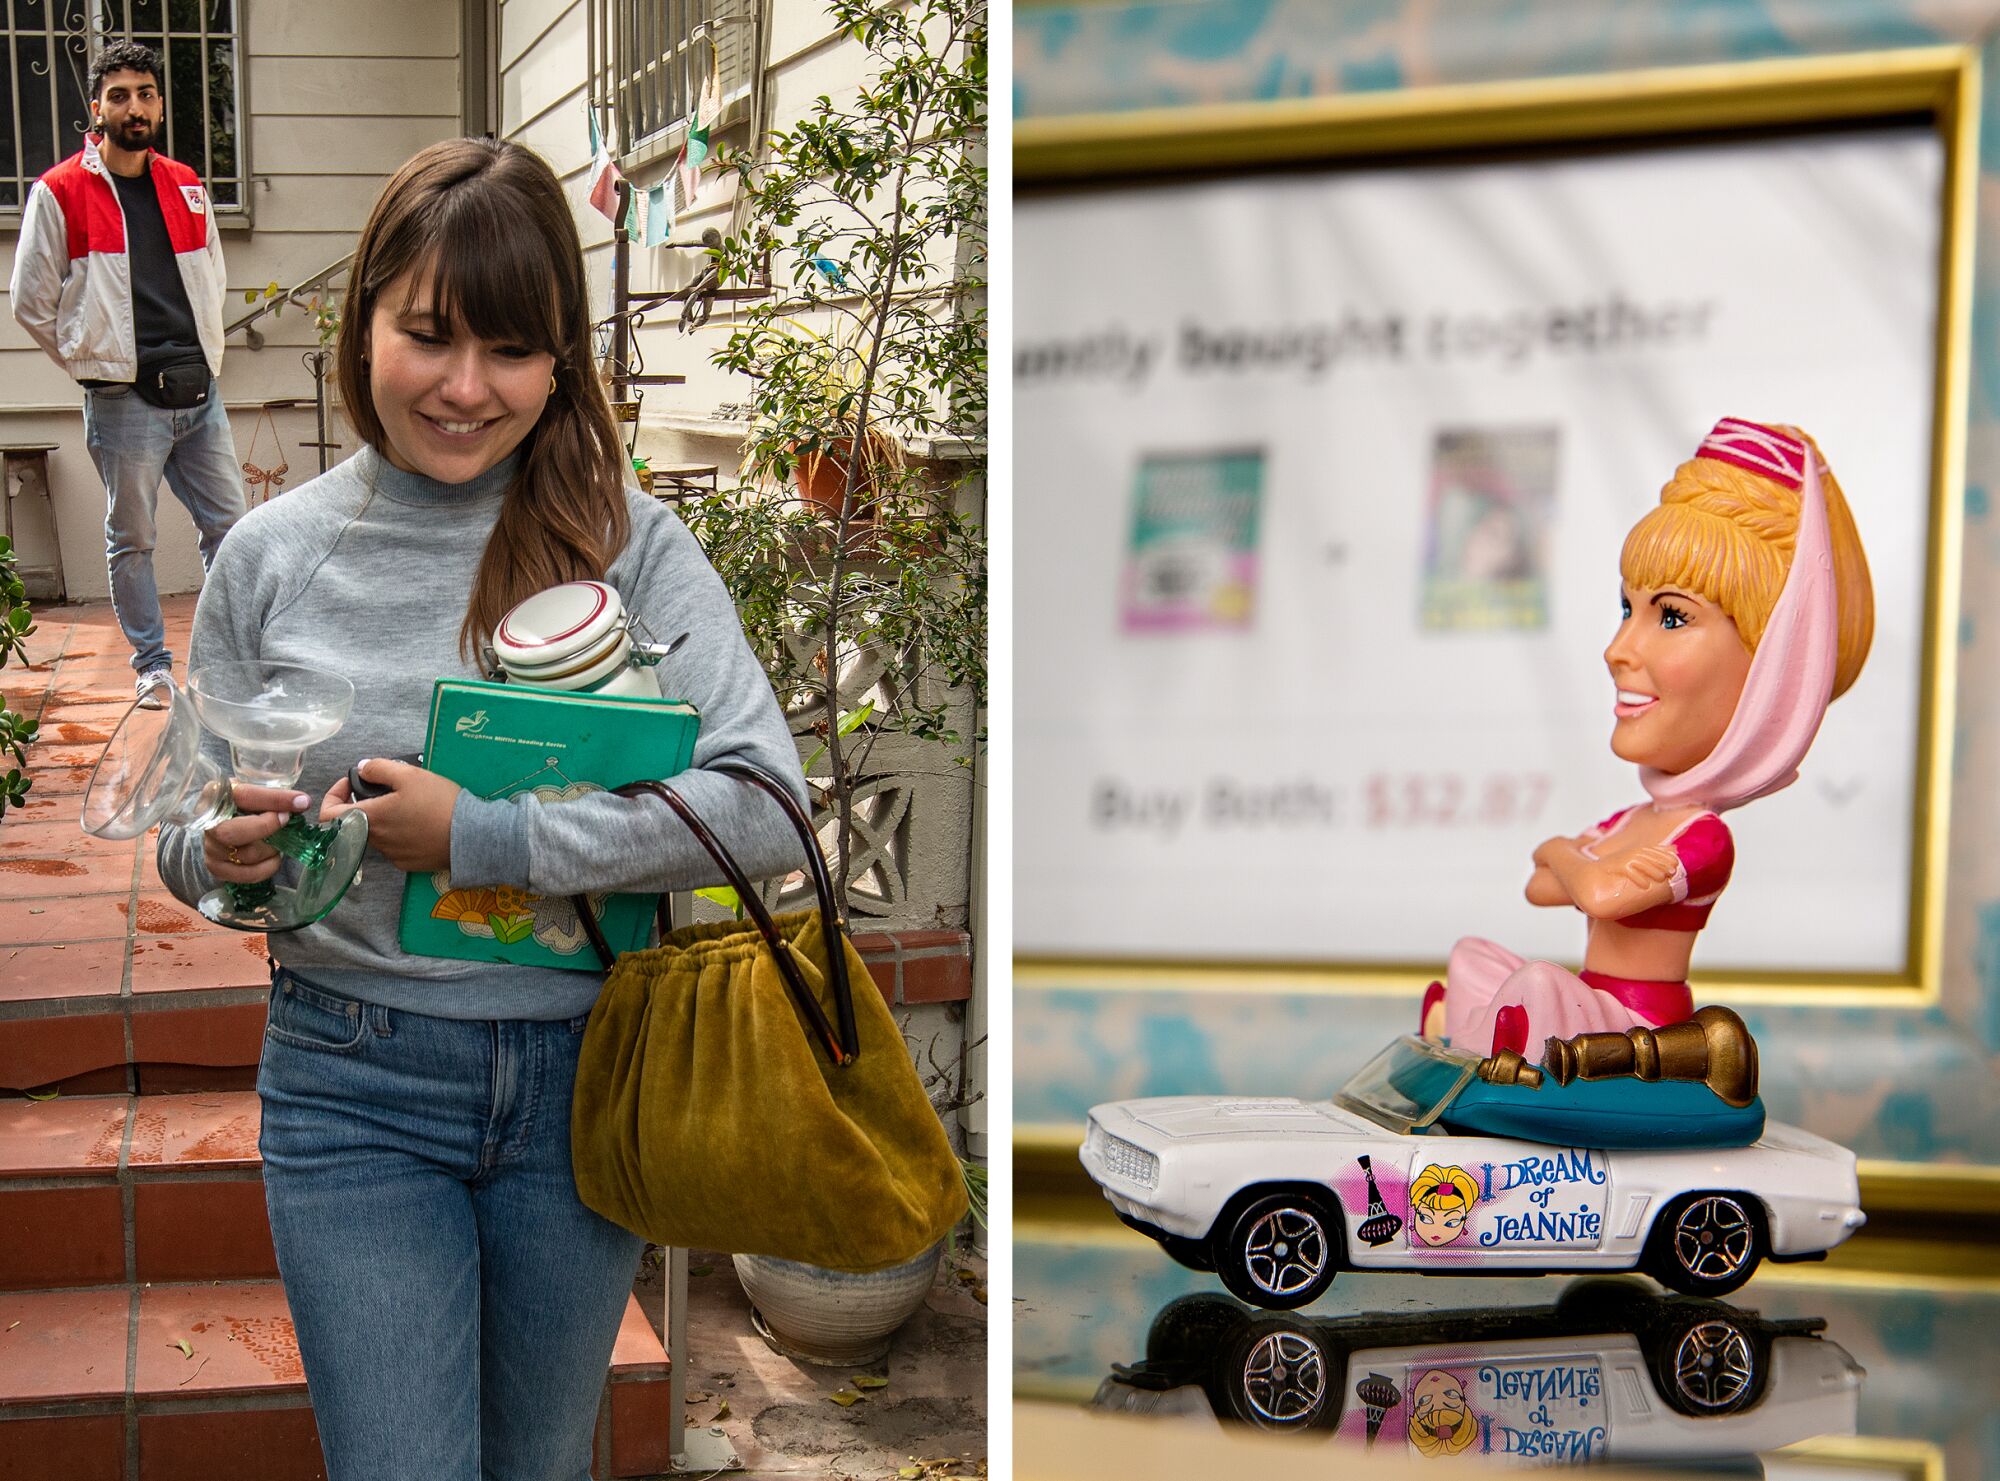 Two photos side by side, one of Amy Solomon exiting a house with items in her arms, and one of a toy sitting on a surface.